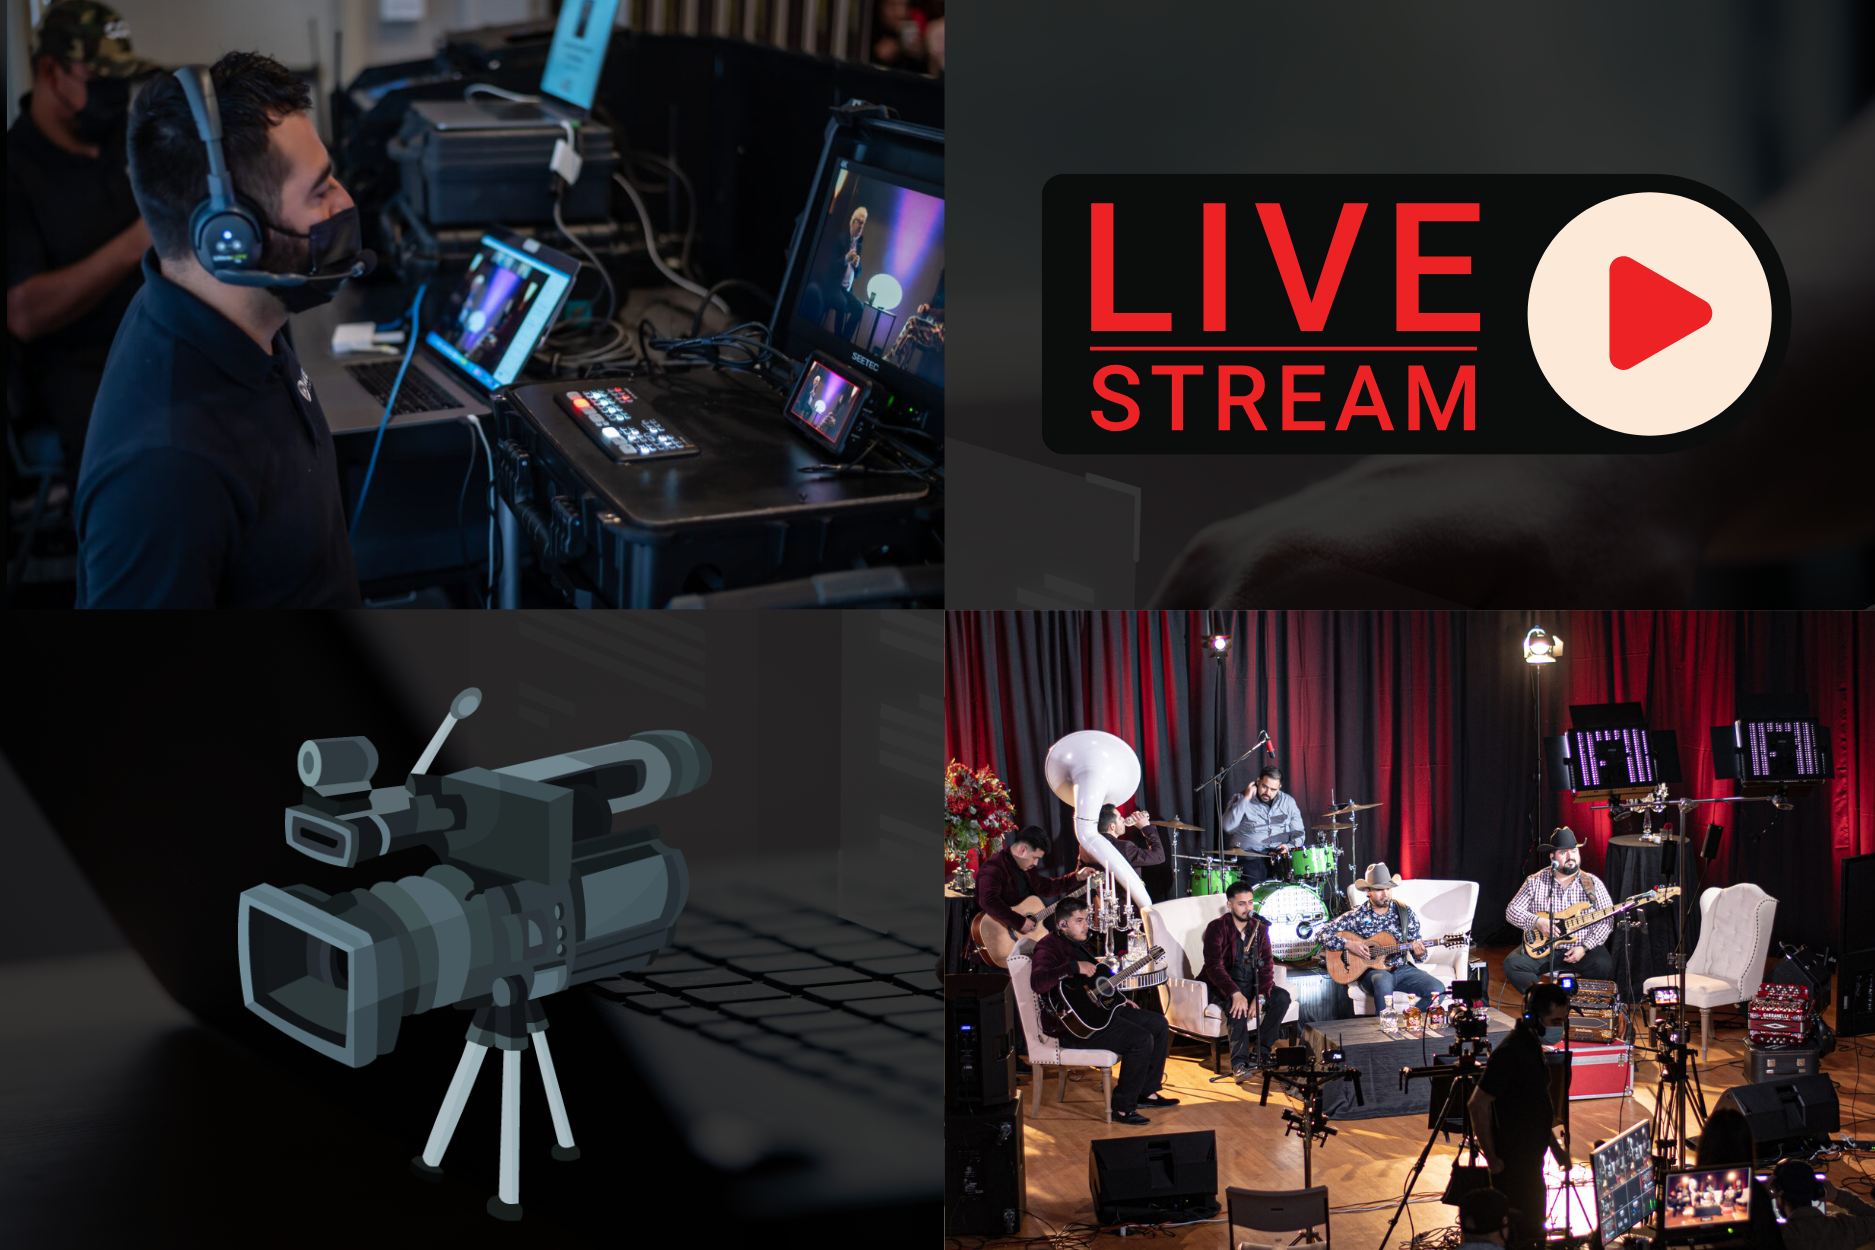 Live streaming concerts